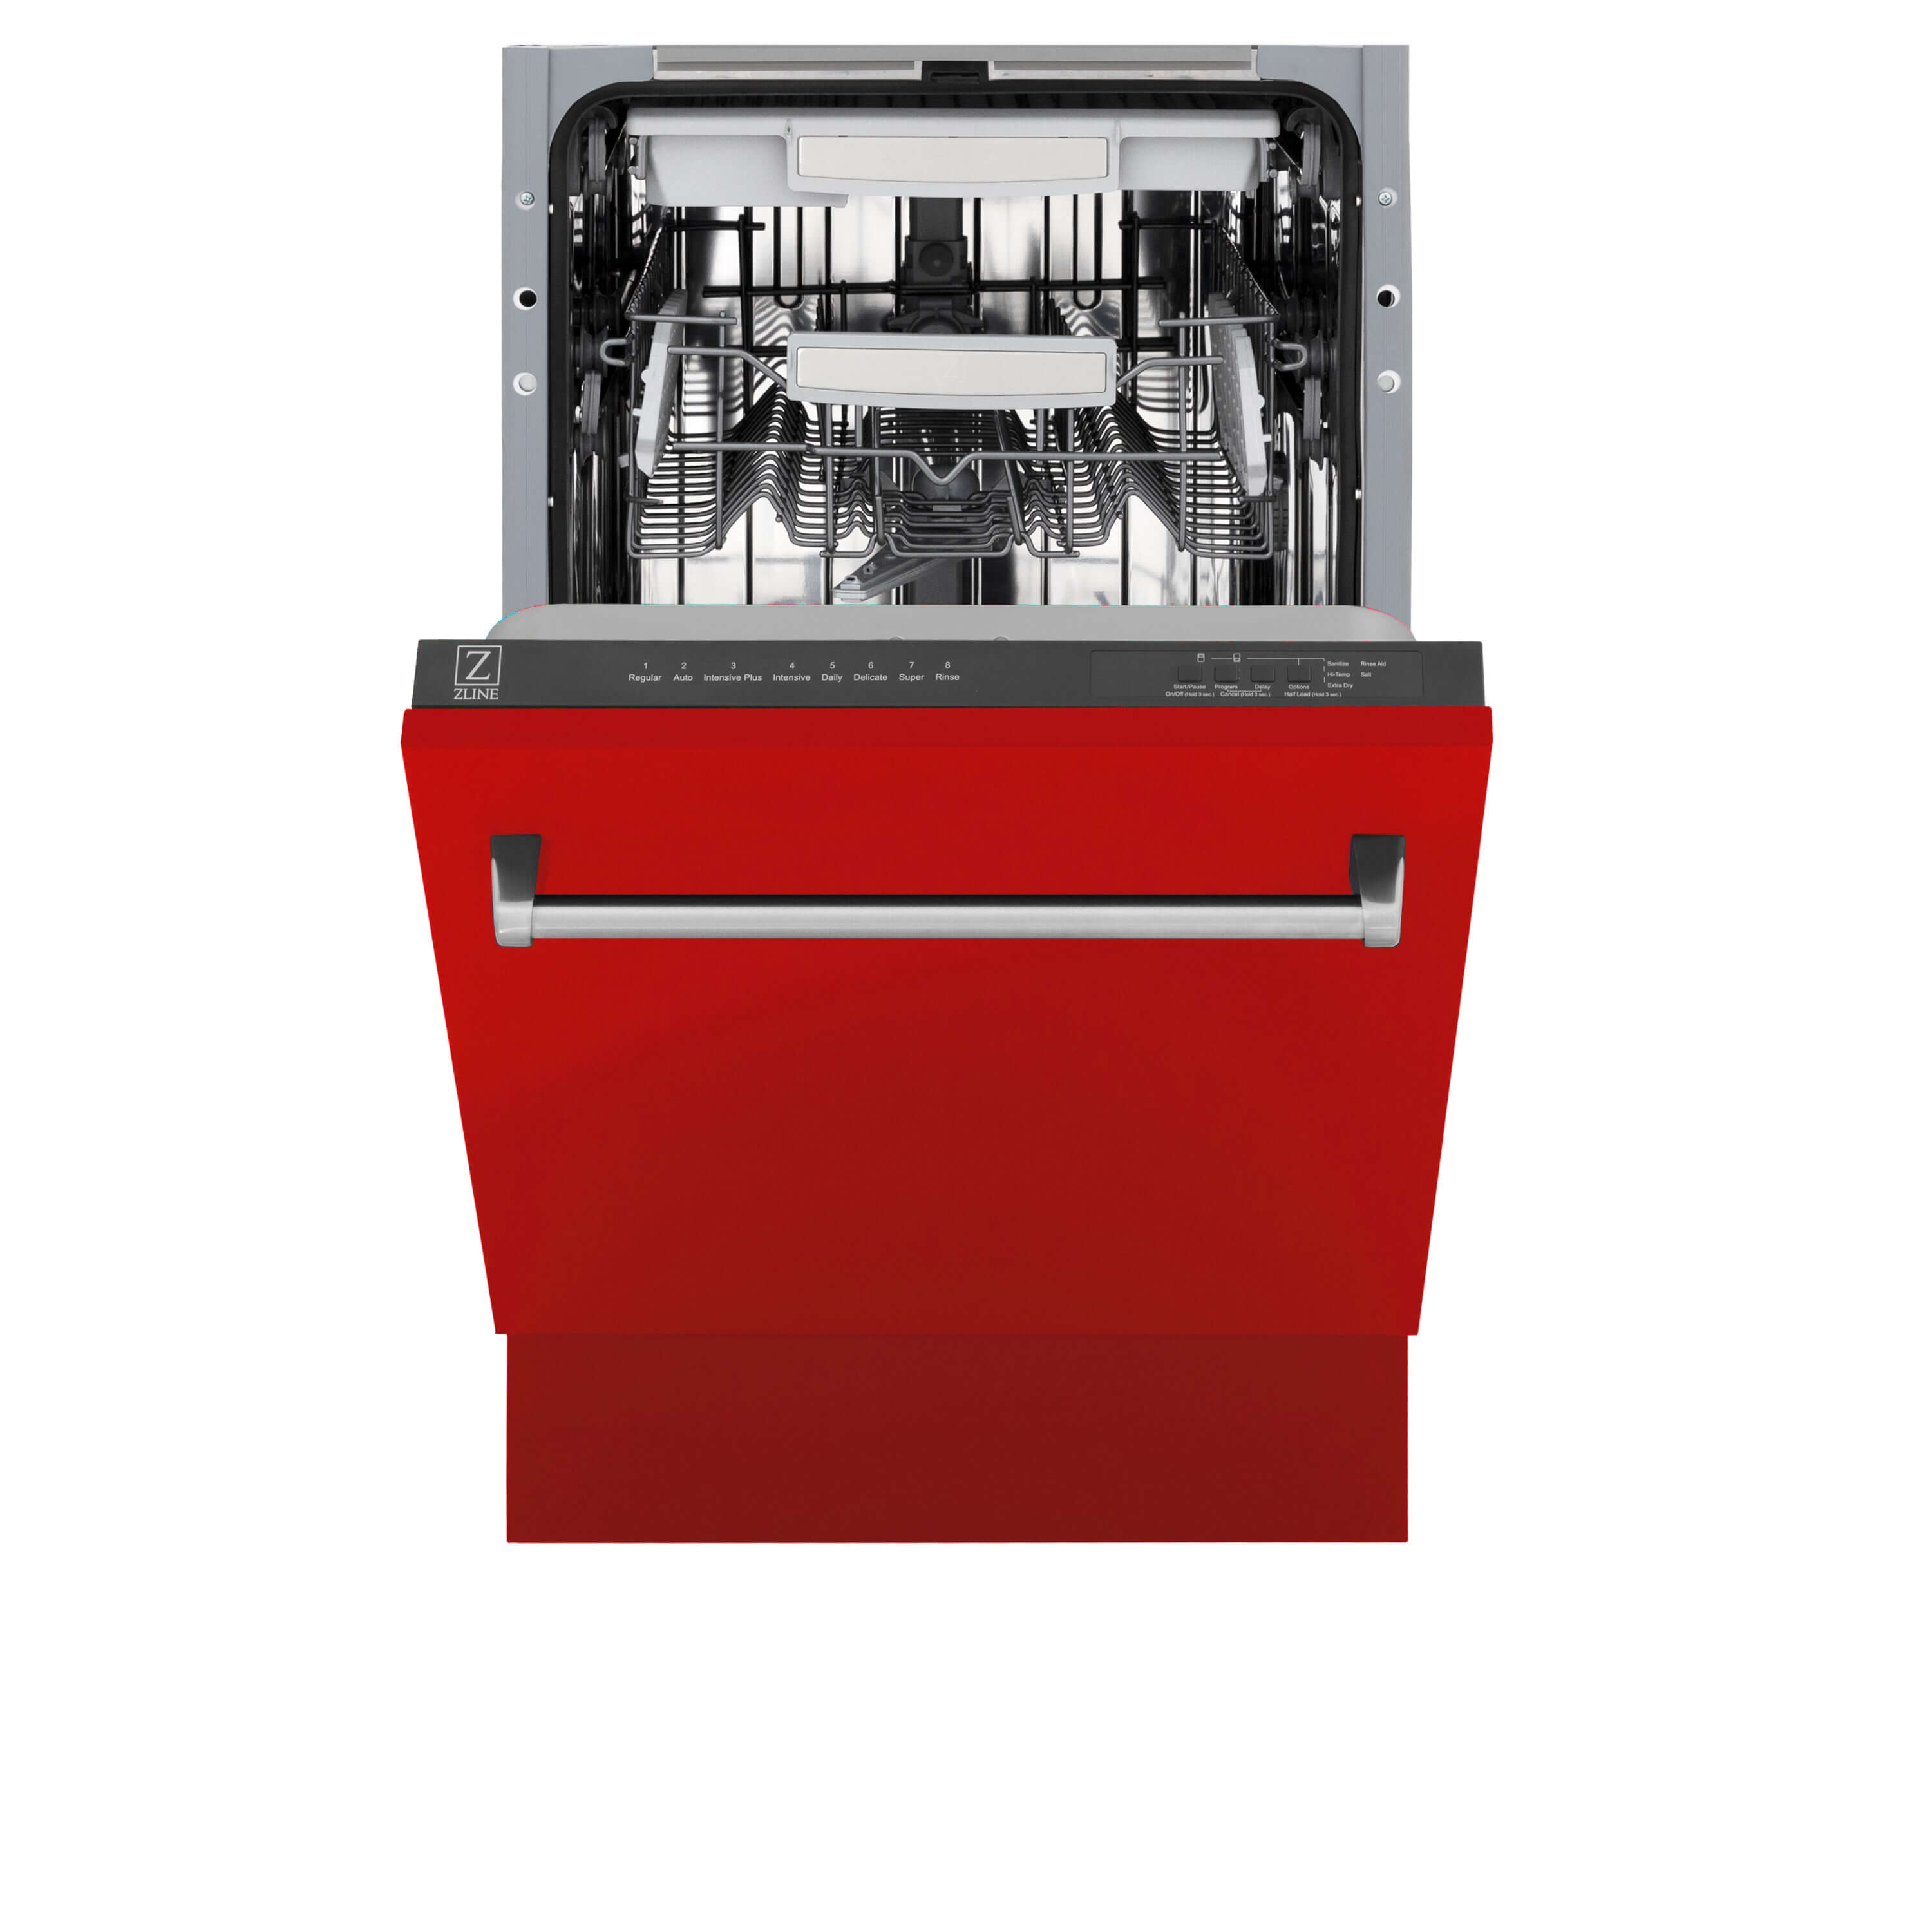 ZLINE 18 in. Tallac Series 3rd Rack Top Control Built-In Dishwasher in Red Matte with Stainless Steel Tub, 51dBa (DWV-RM-18) front, half open.